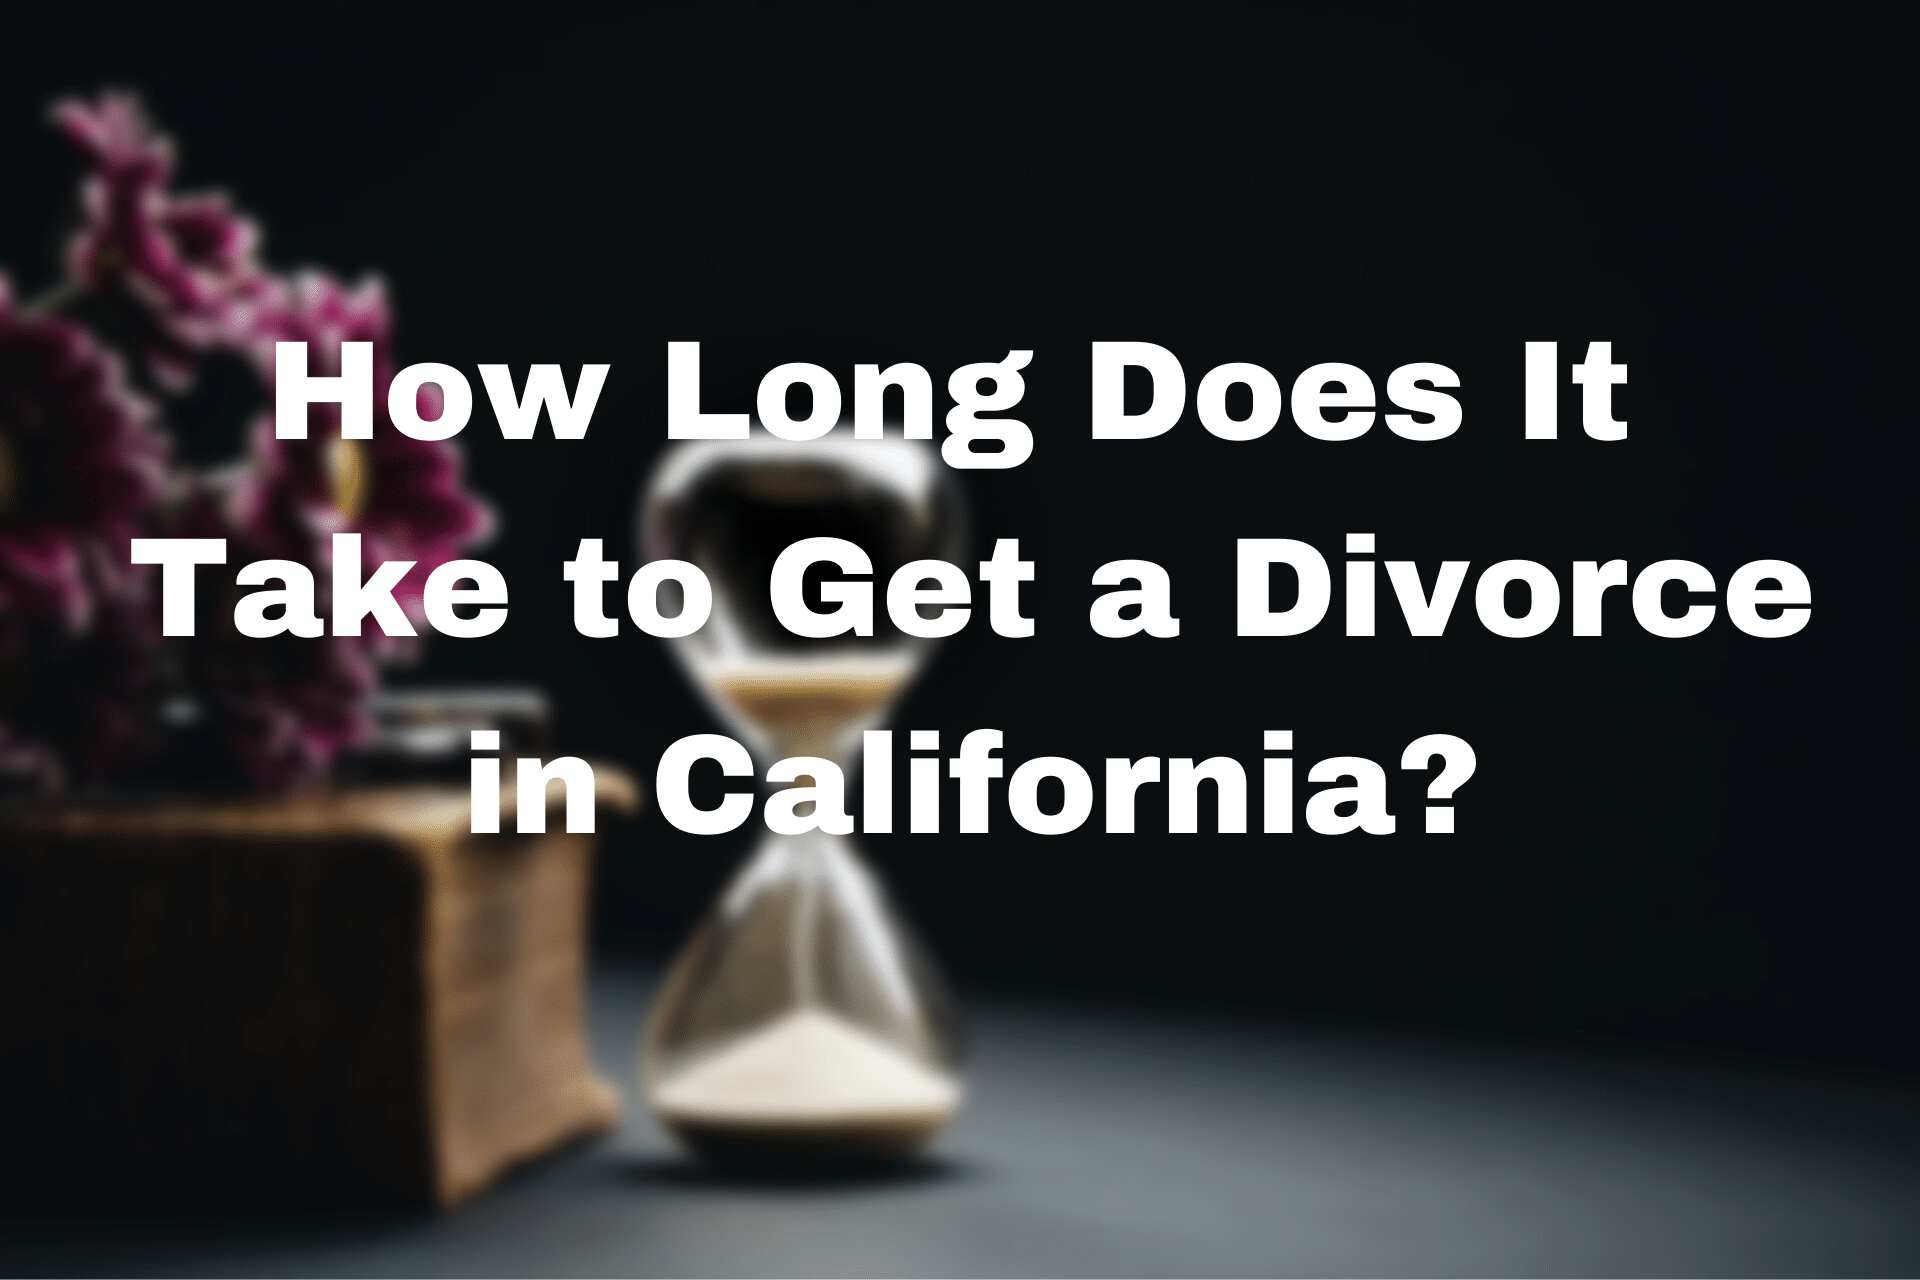 Stock image with text: "How Long Does It Take to Get a Divorce in California?"